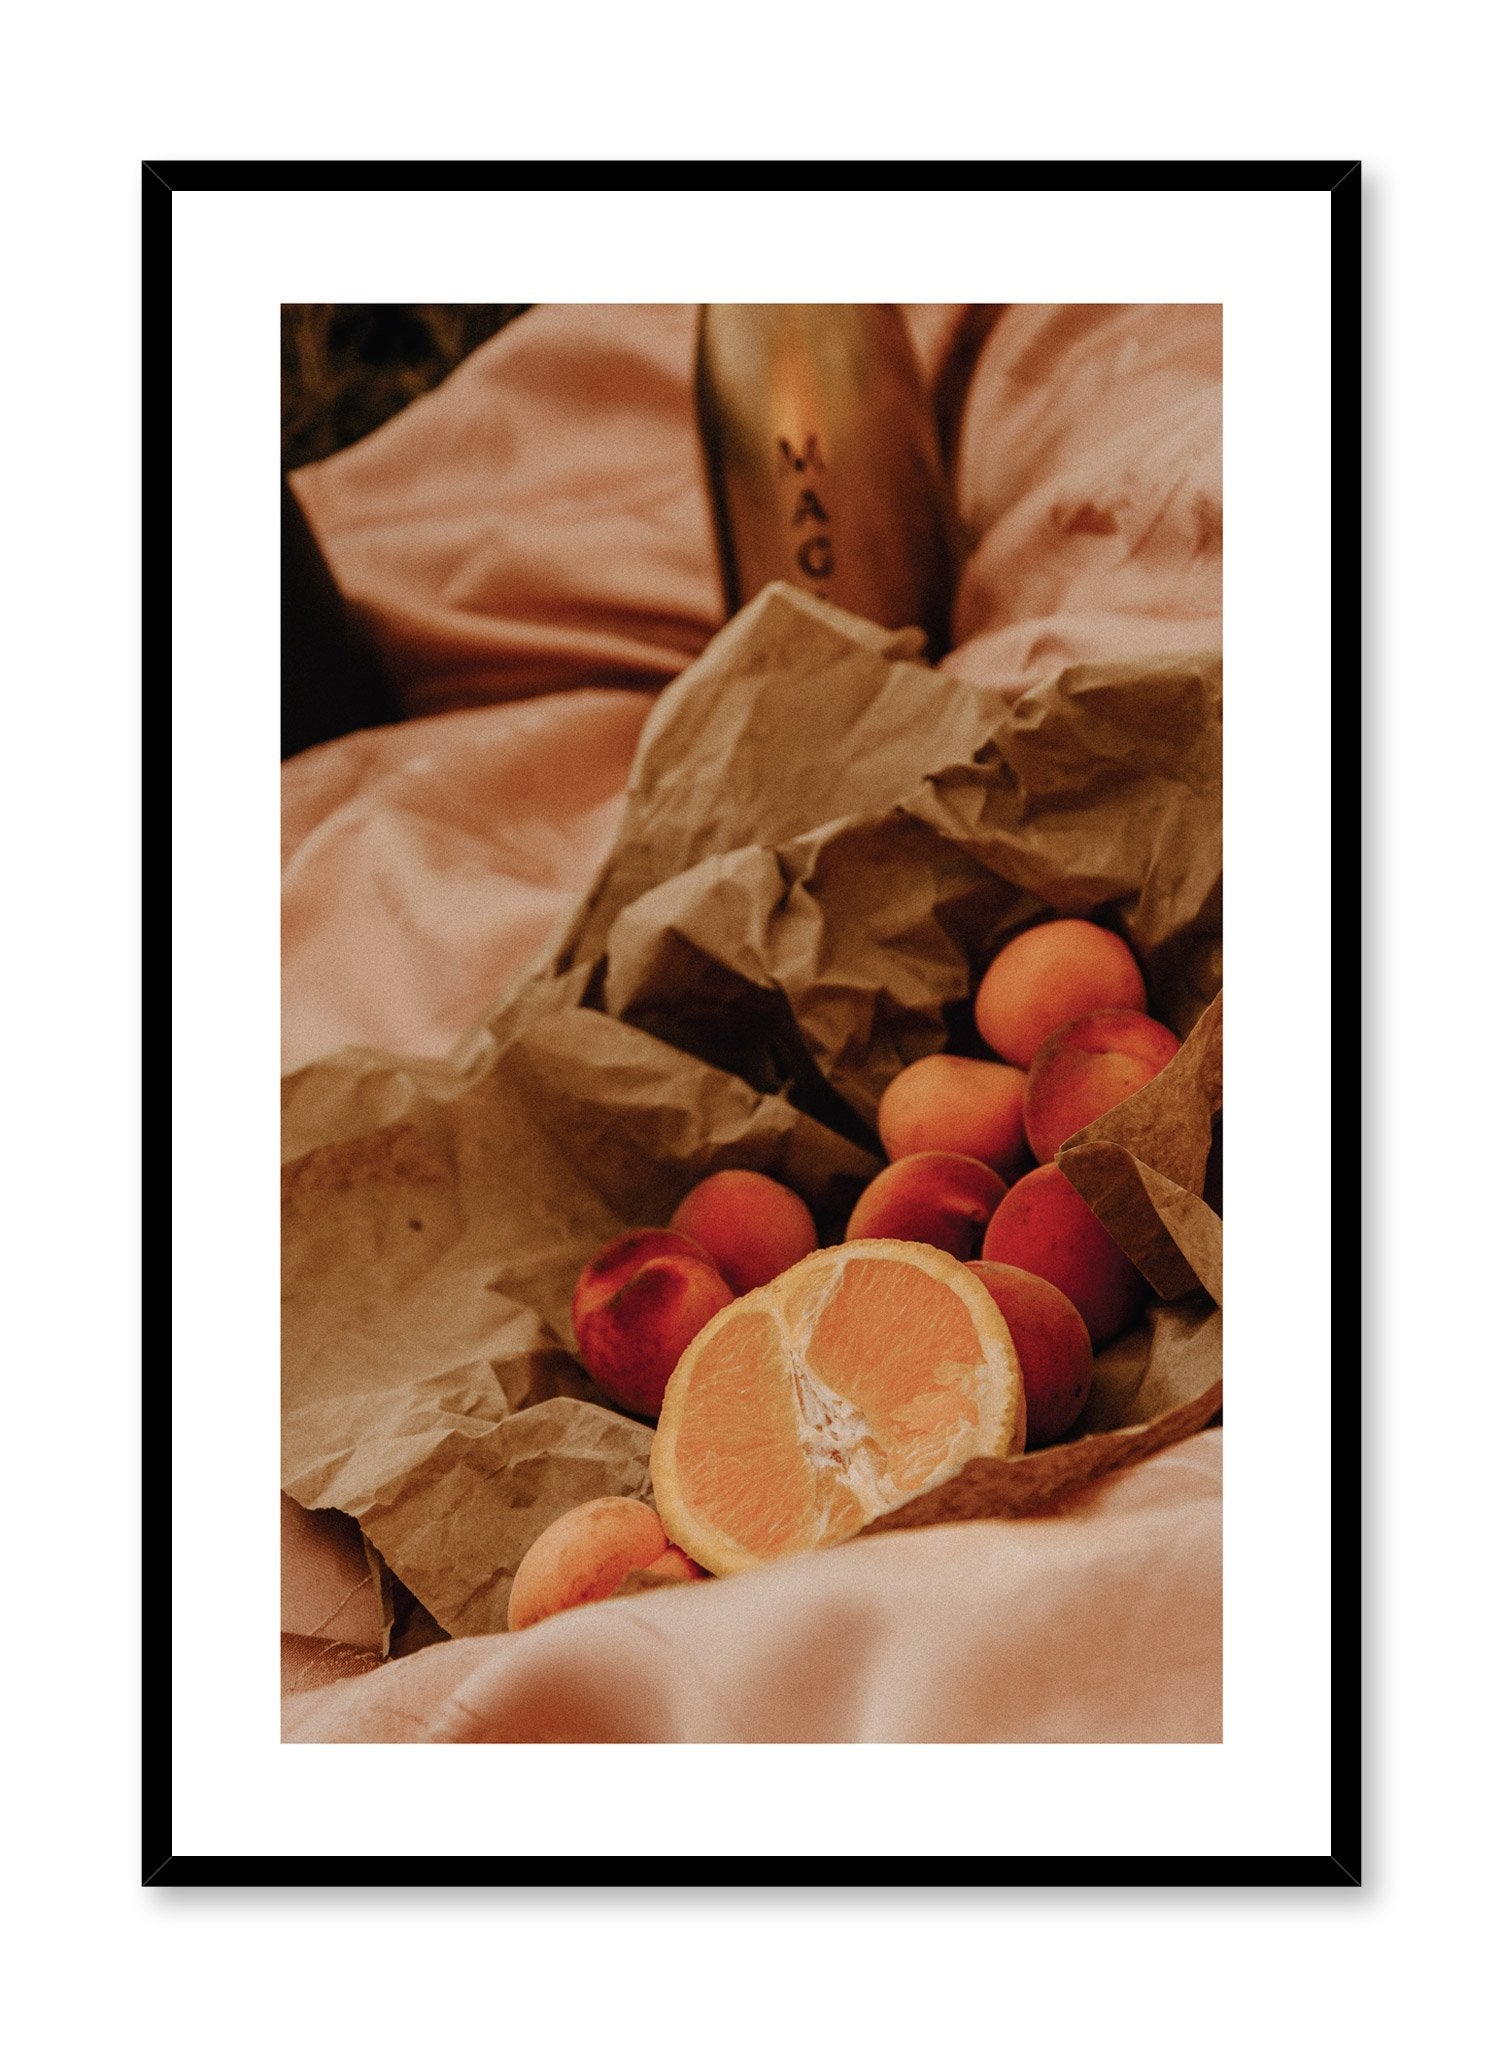 Picnic at Sunset is a citrus picnic photography poster by Opposite Wall.